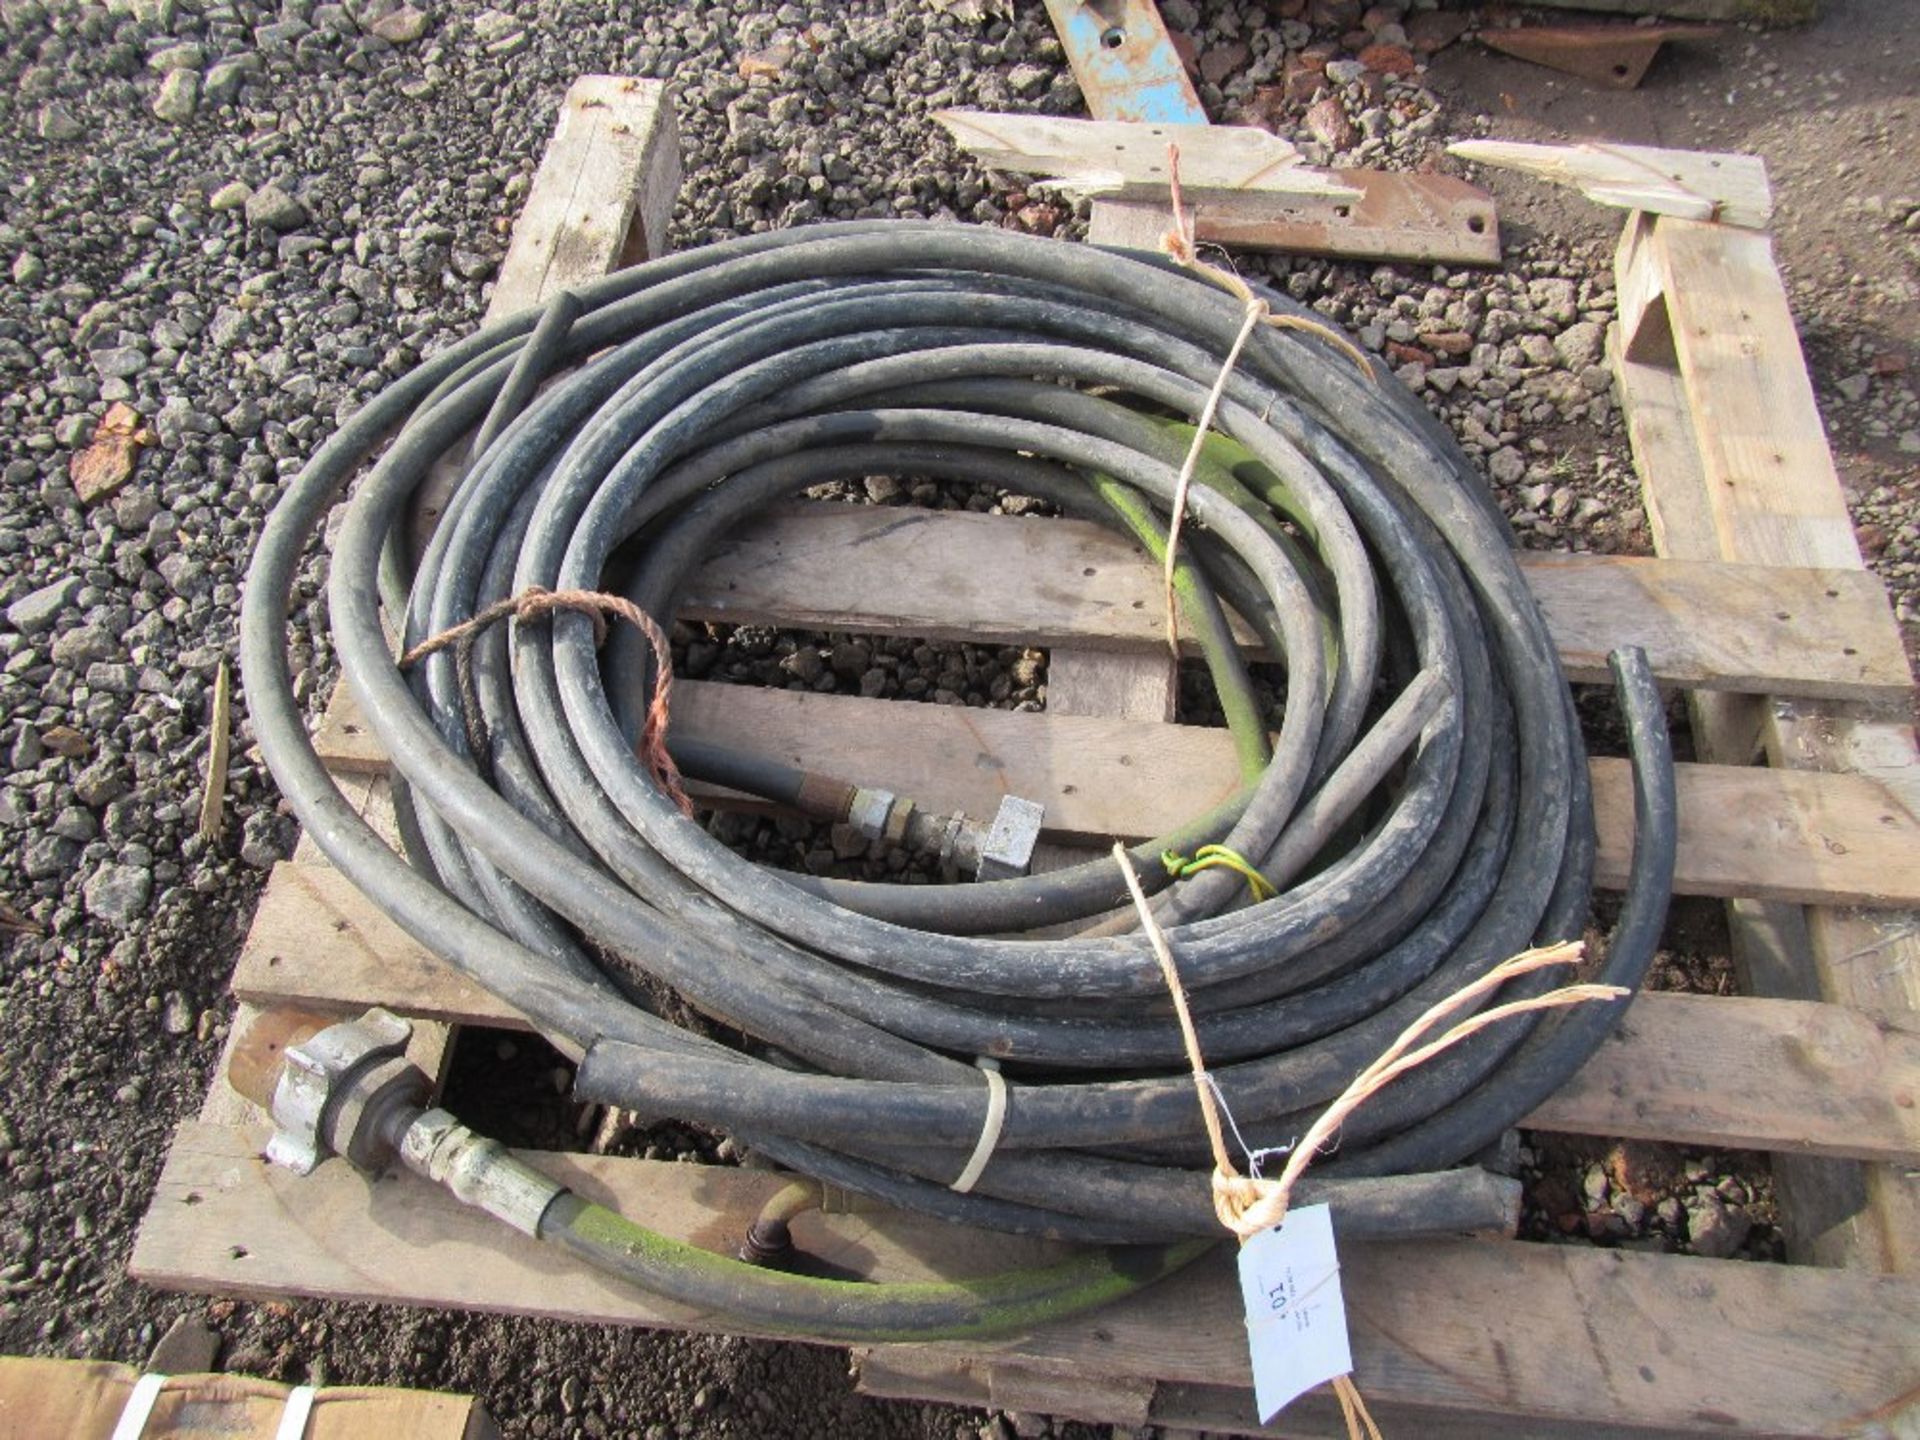 Pallet of Hydraulic Hoses UNRESERVED LOT